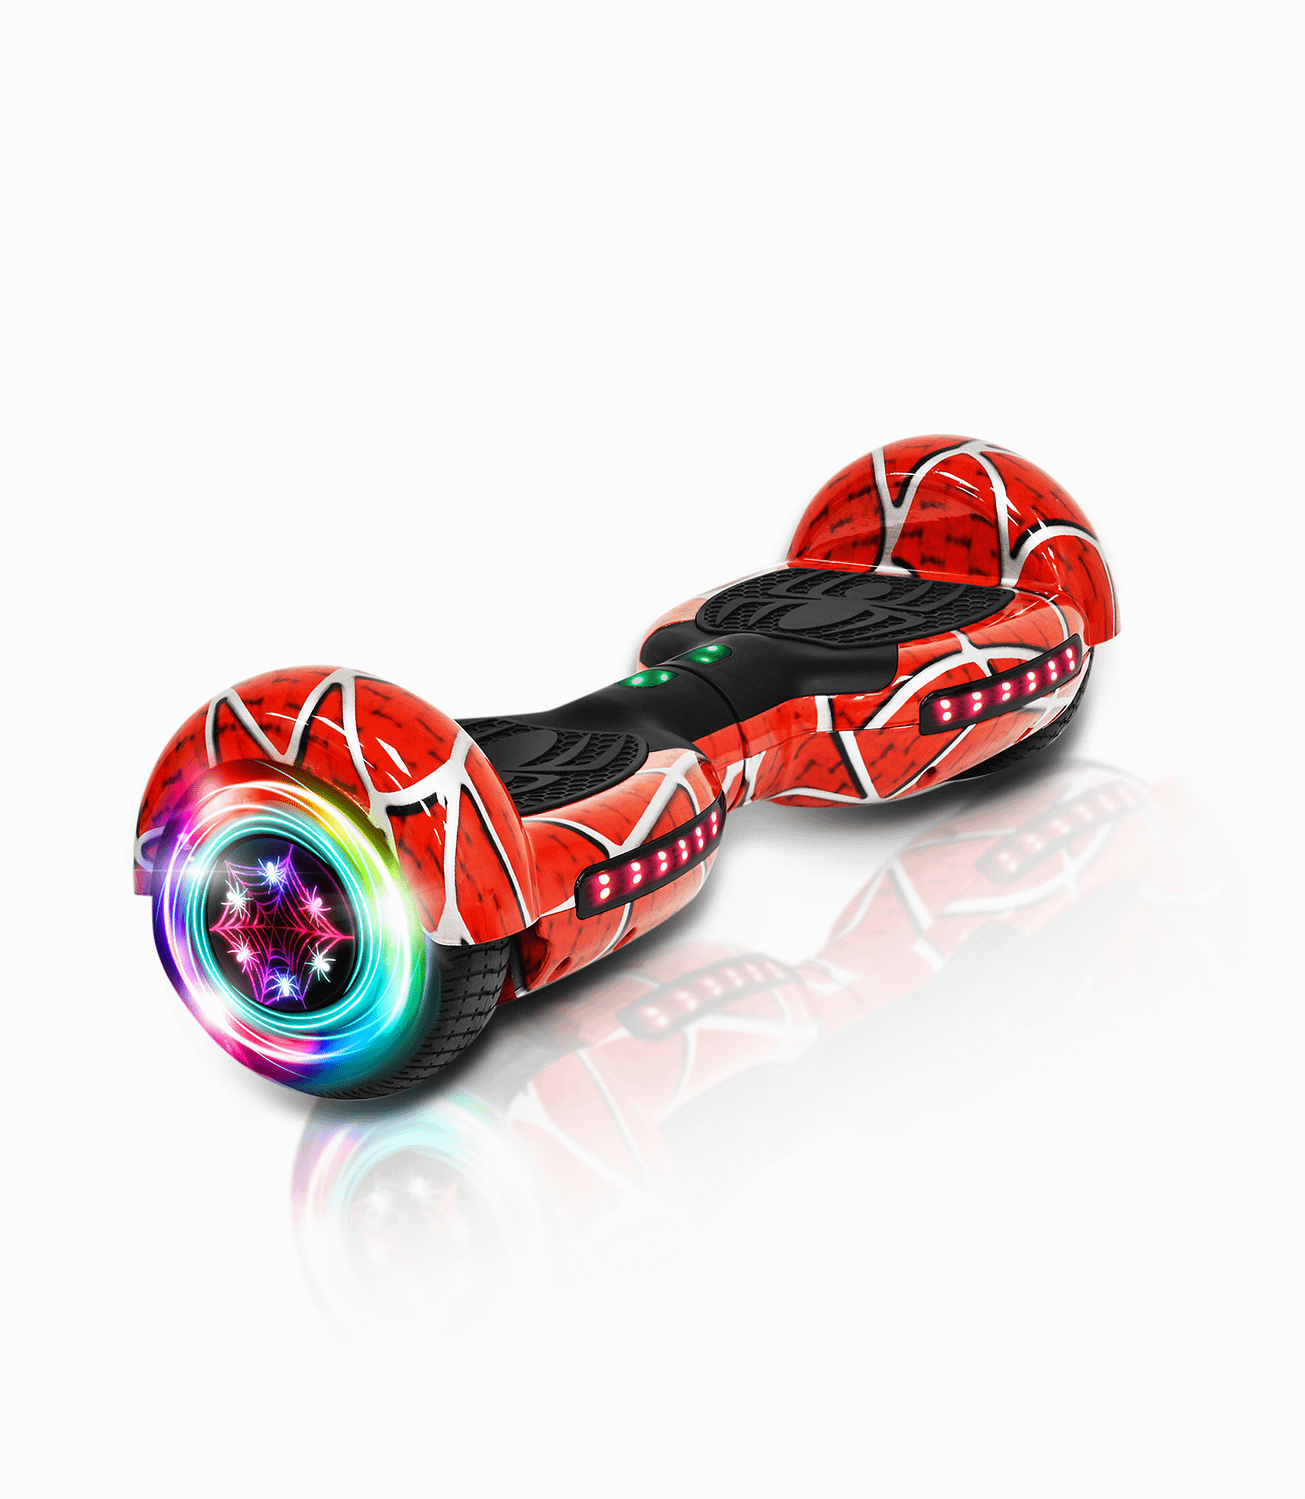 hoverboard-product-red